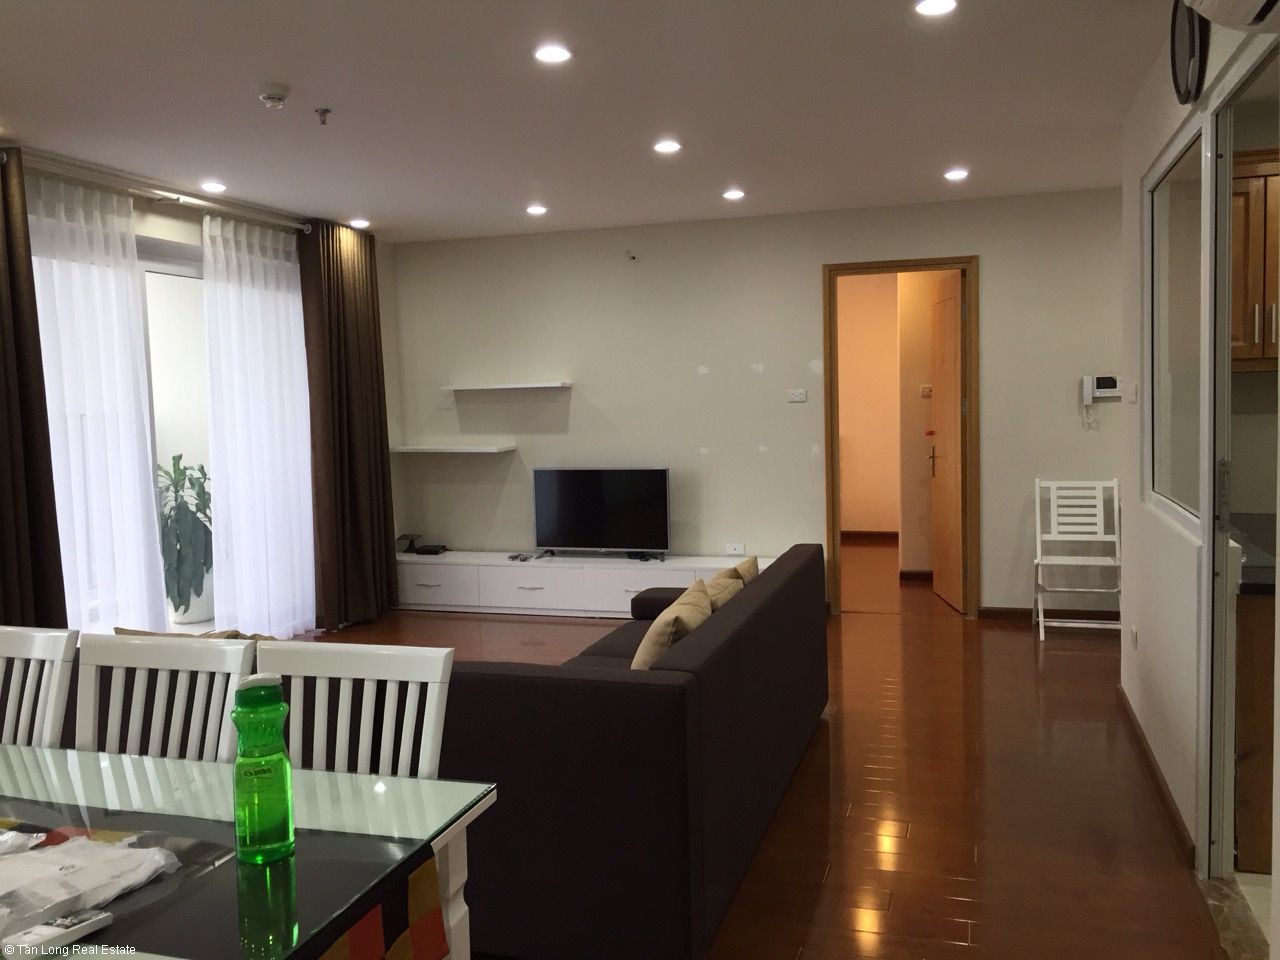 Brand new 3 bedroom furnished apartment in N04 building for rent on Hoang Dao Thuy street, Trung Hoa Nhan Chinh, Cau Giay 2